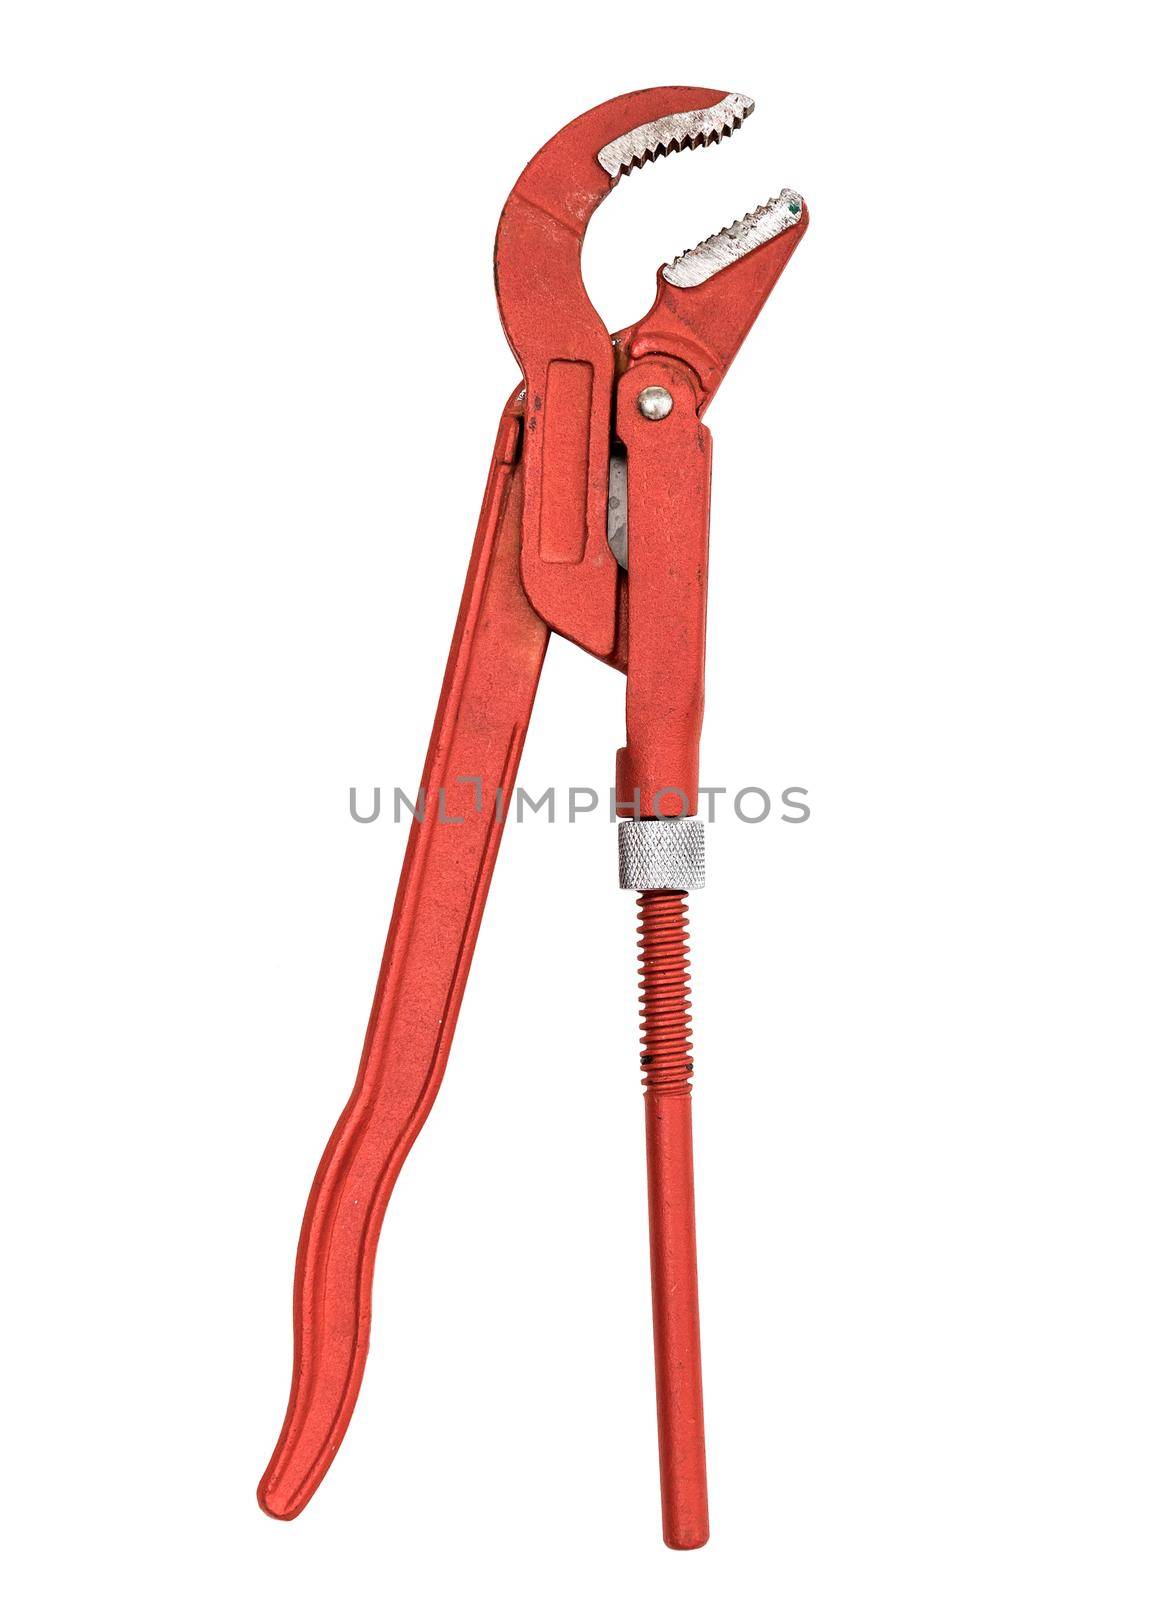 Red pipe wrench isolated by tan4ikk1